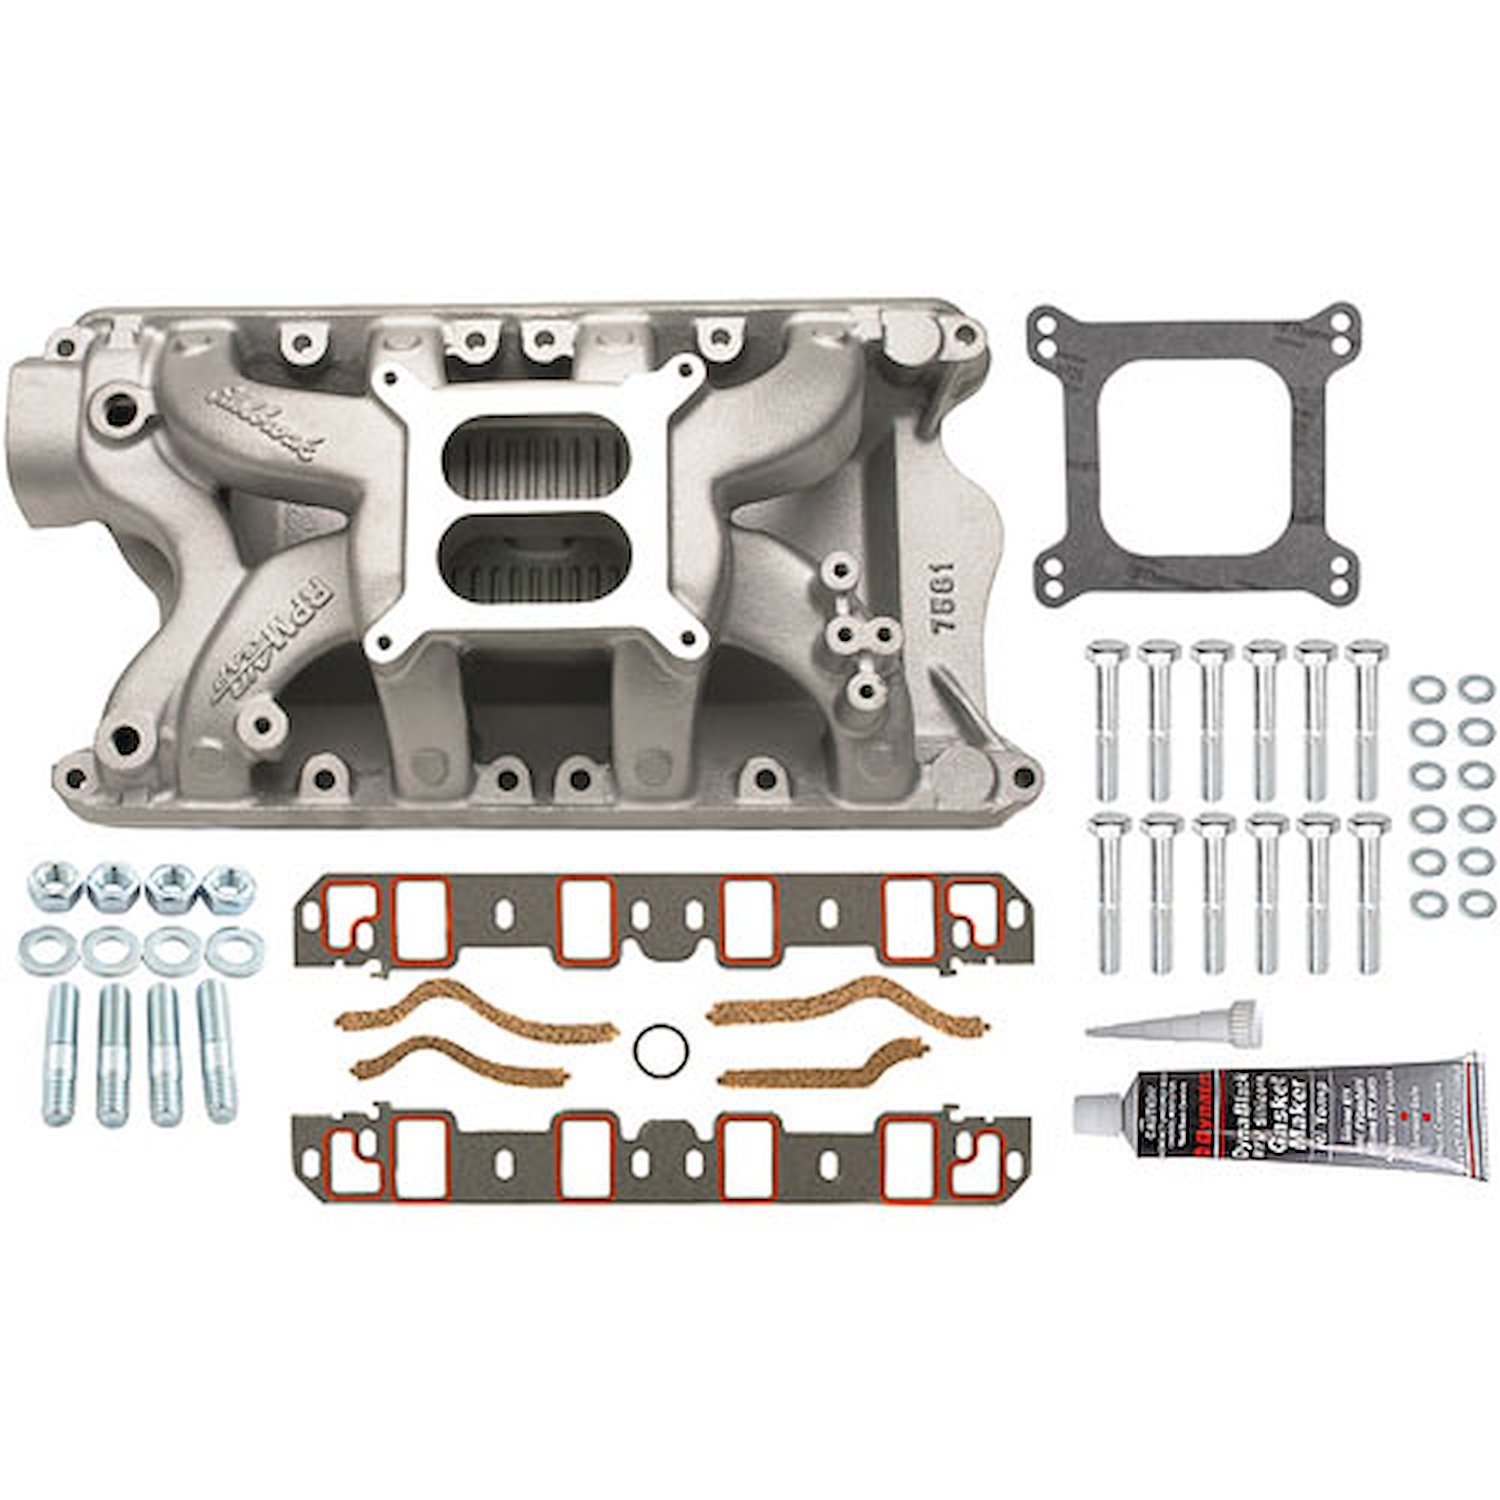 RPM Air-Gap Ford 351W Intake Manifold with Installation Kit